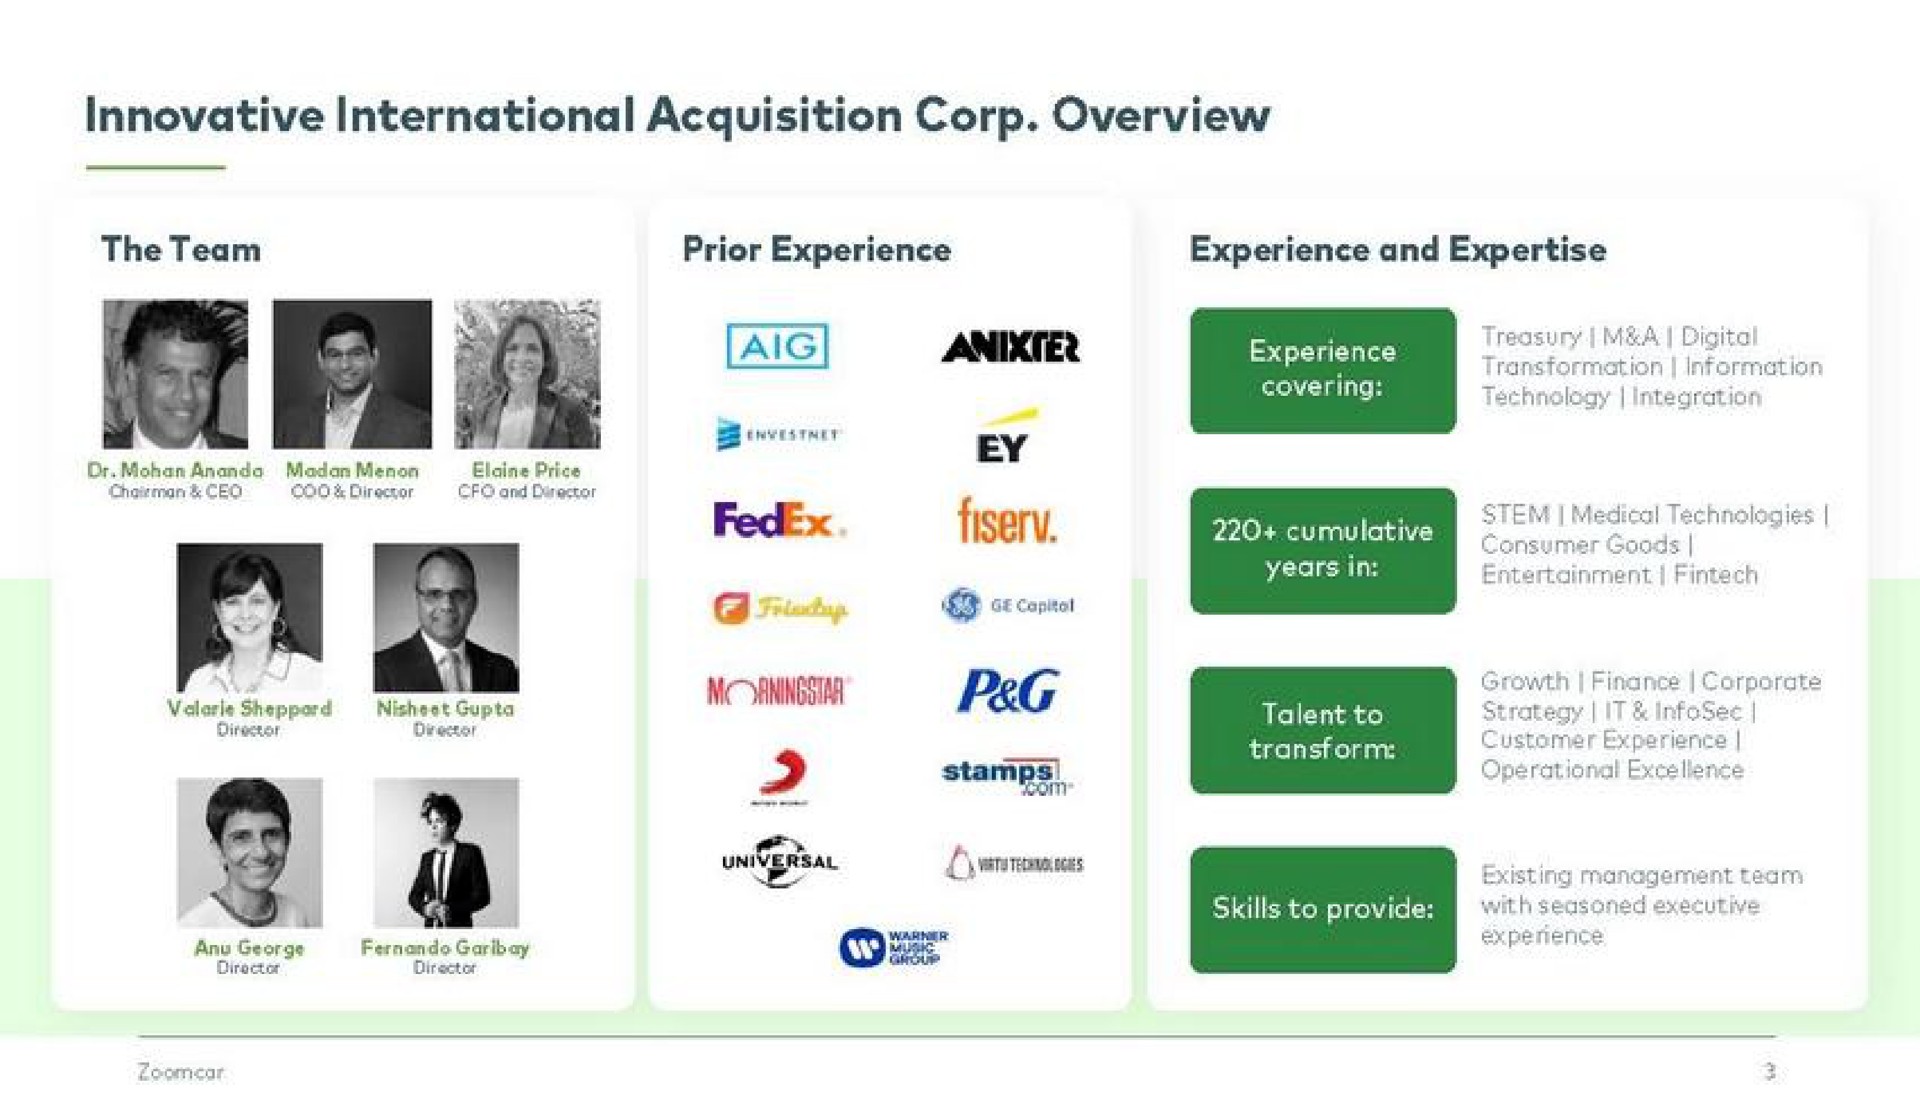 innovative international acquisition corp overview with seasoned | Zoomcar